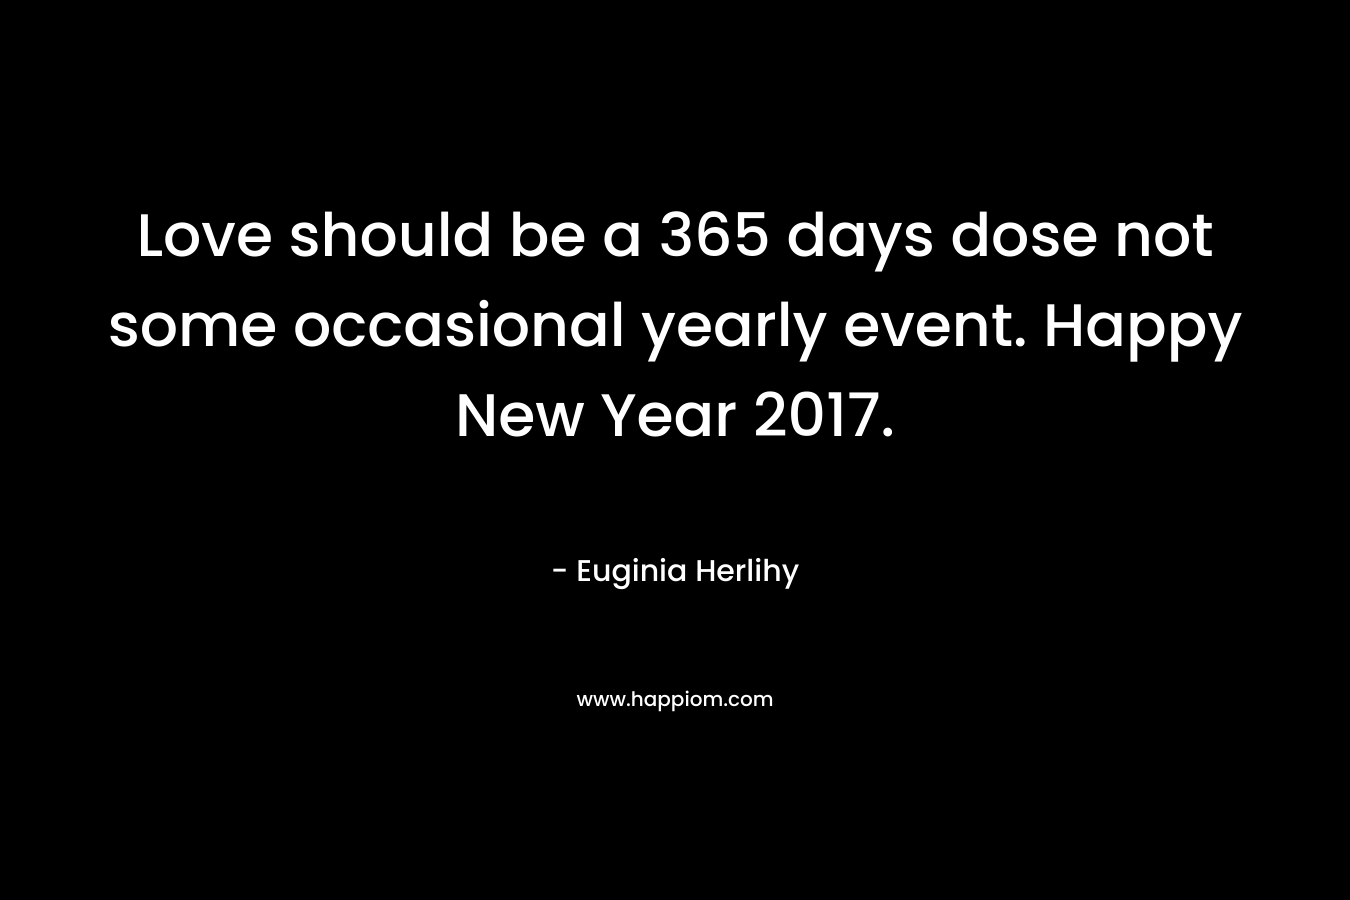 Love should be a 365 days dose not some occasional yearly event. Happy New Year 2017. – Euginia Herlihy